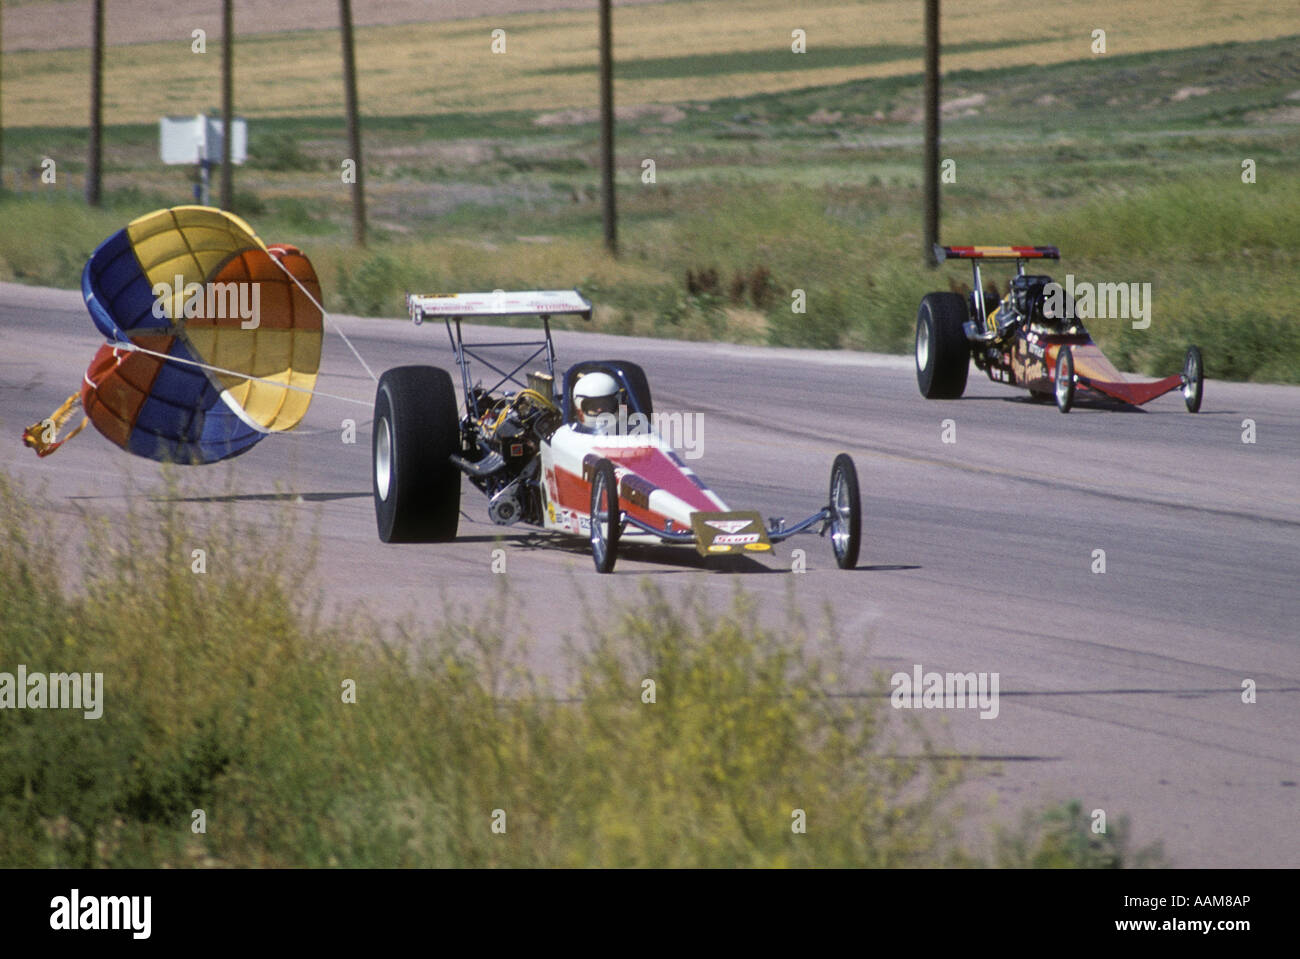 1970s DRAG RACE TWO ALCOHOL BURNING CARS DRAGSTERS ON STRIP NEAR FINISH OPEN DROGUE PARACHUTE RACING SPEED SLOW DOWN Stock Photo